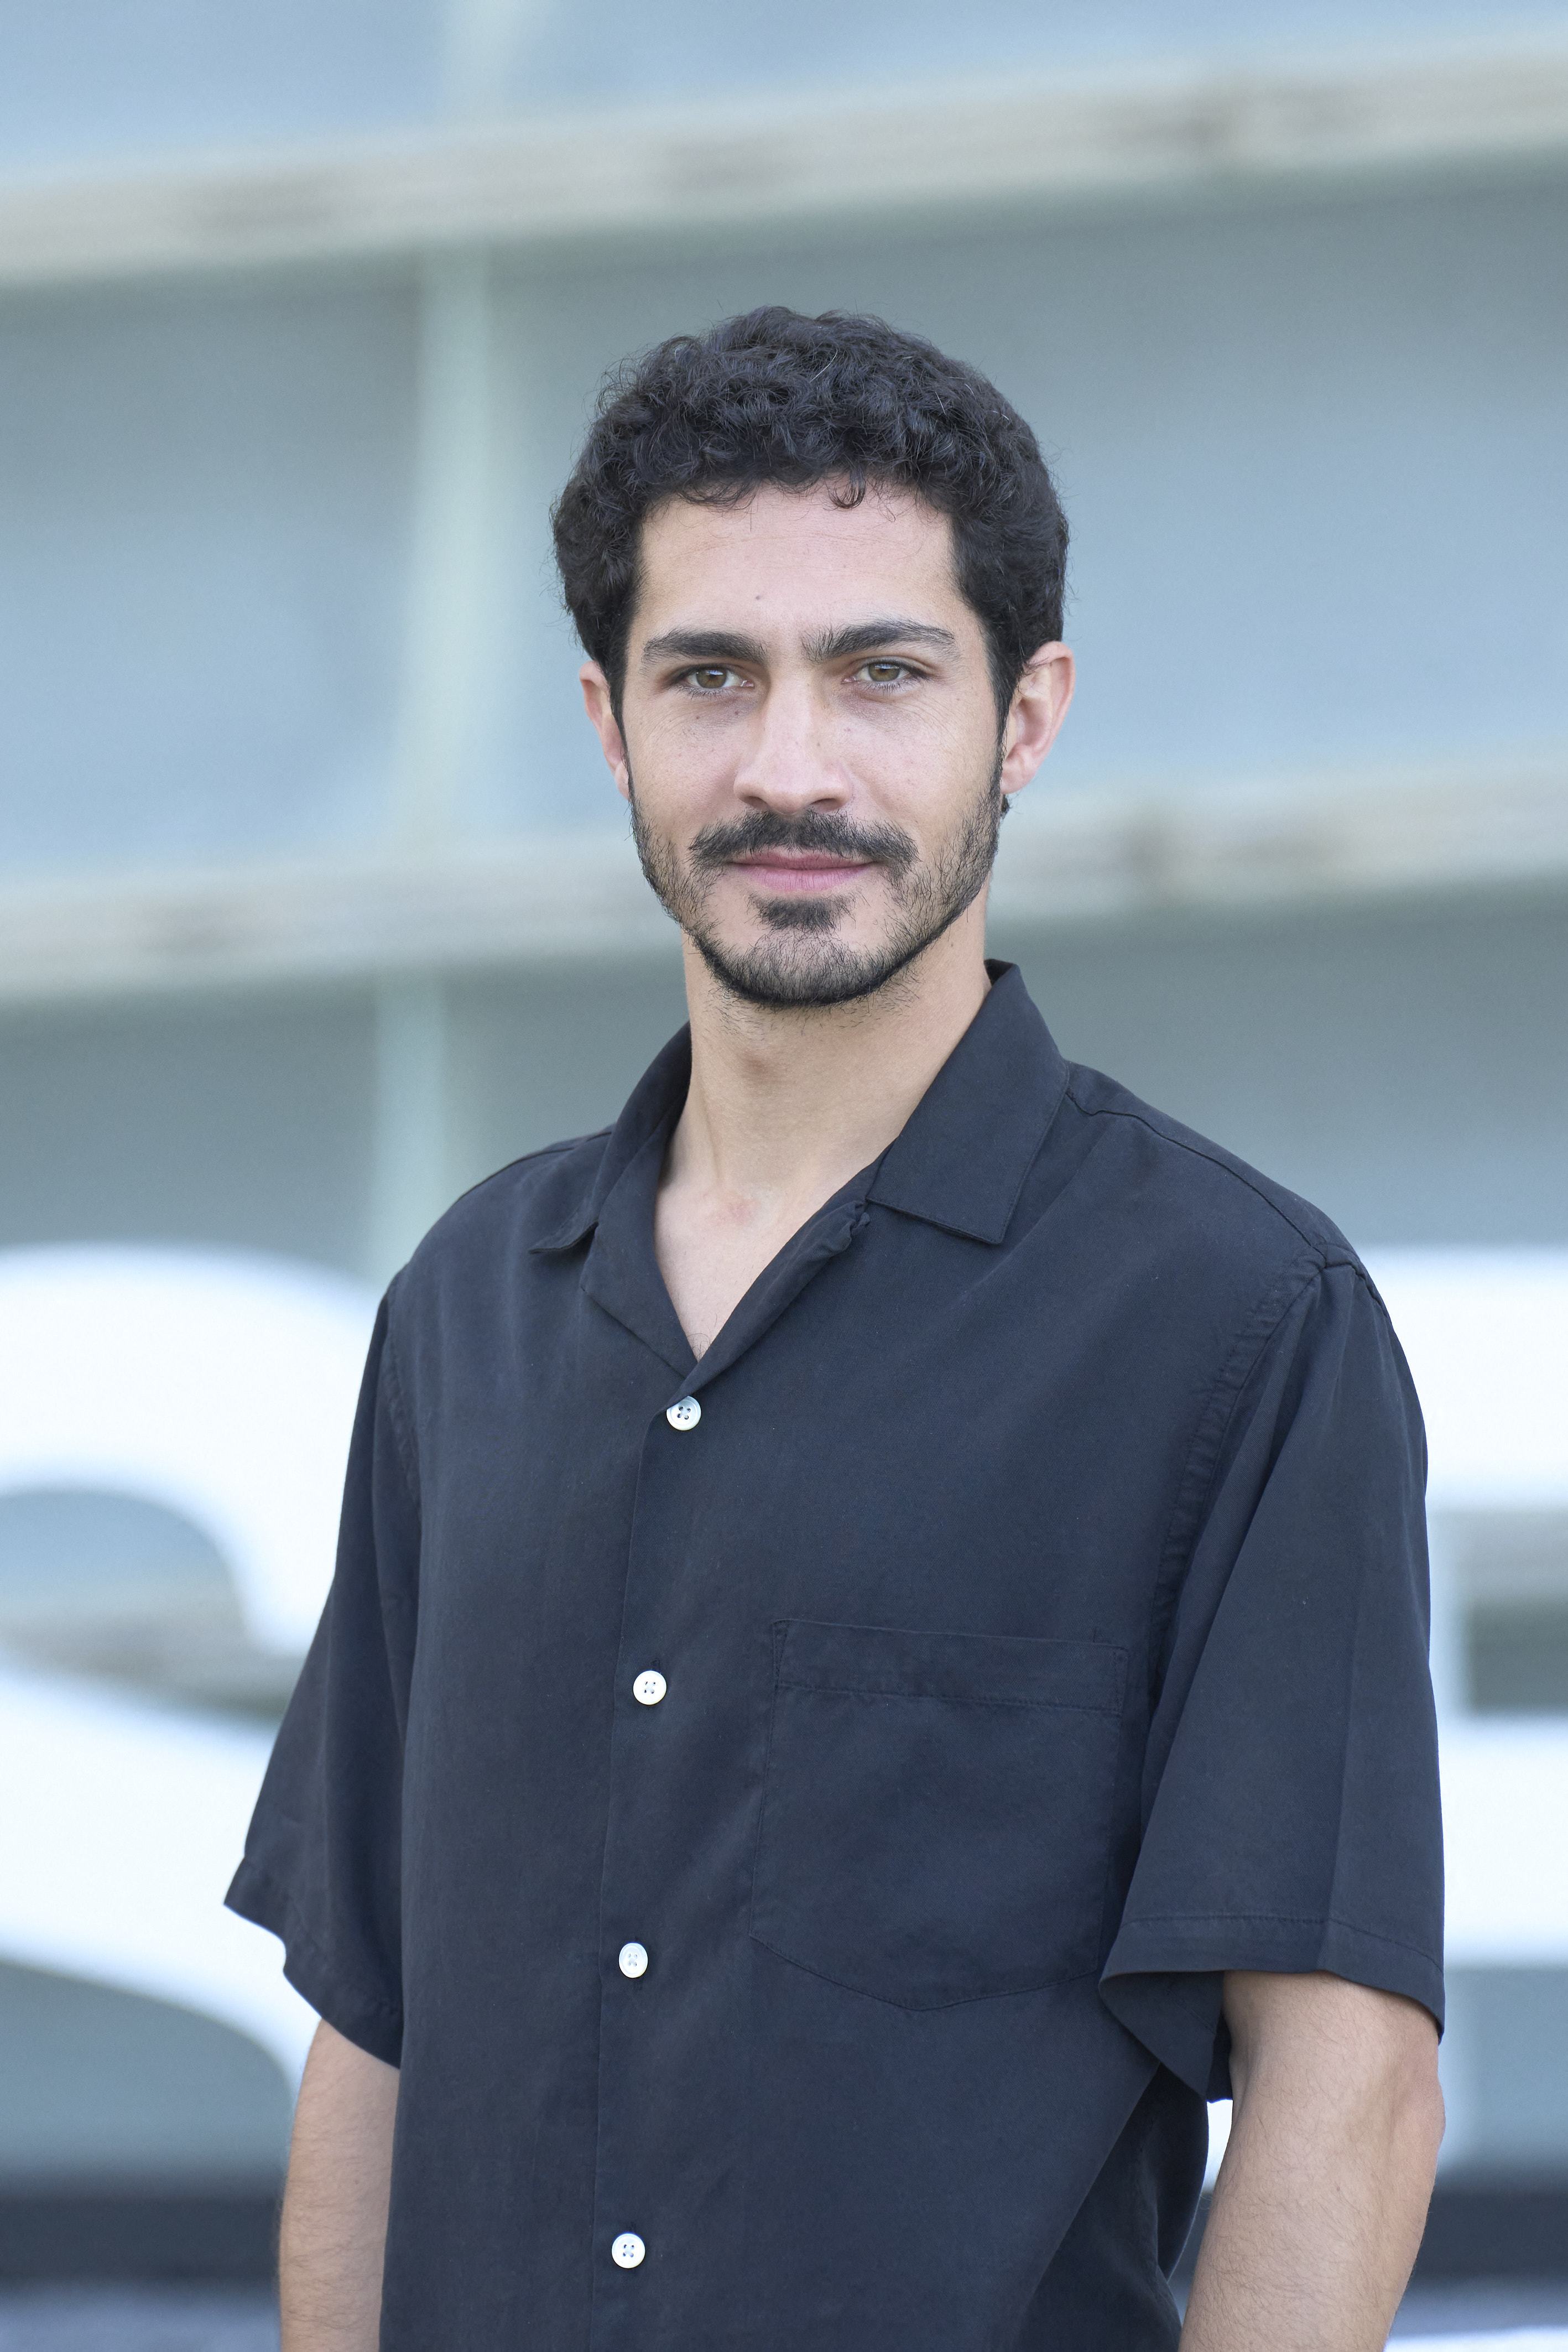 Chino Darín attended the photocall for 